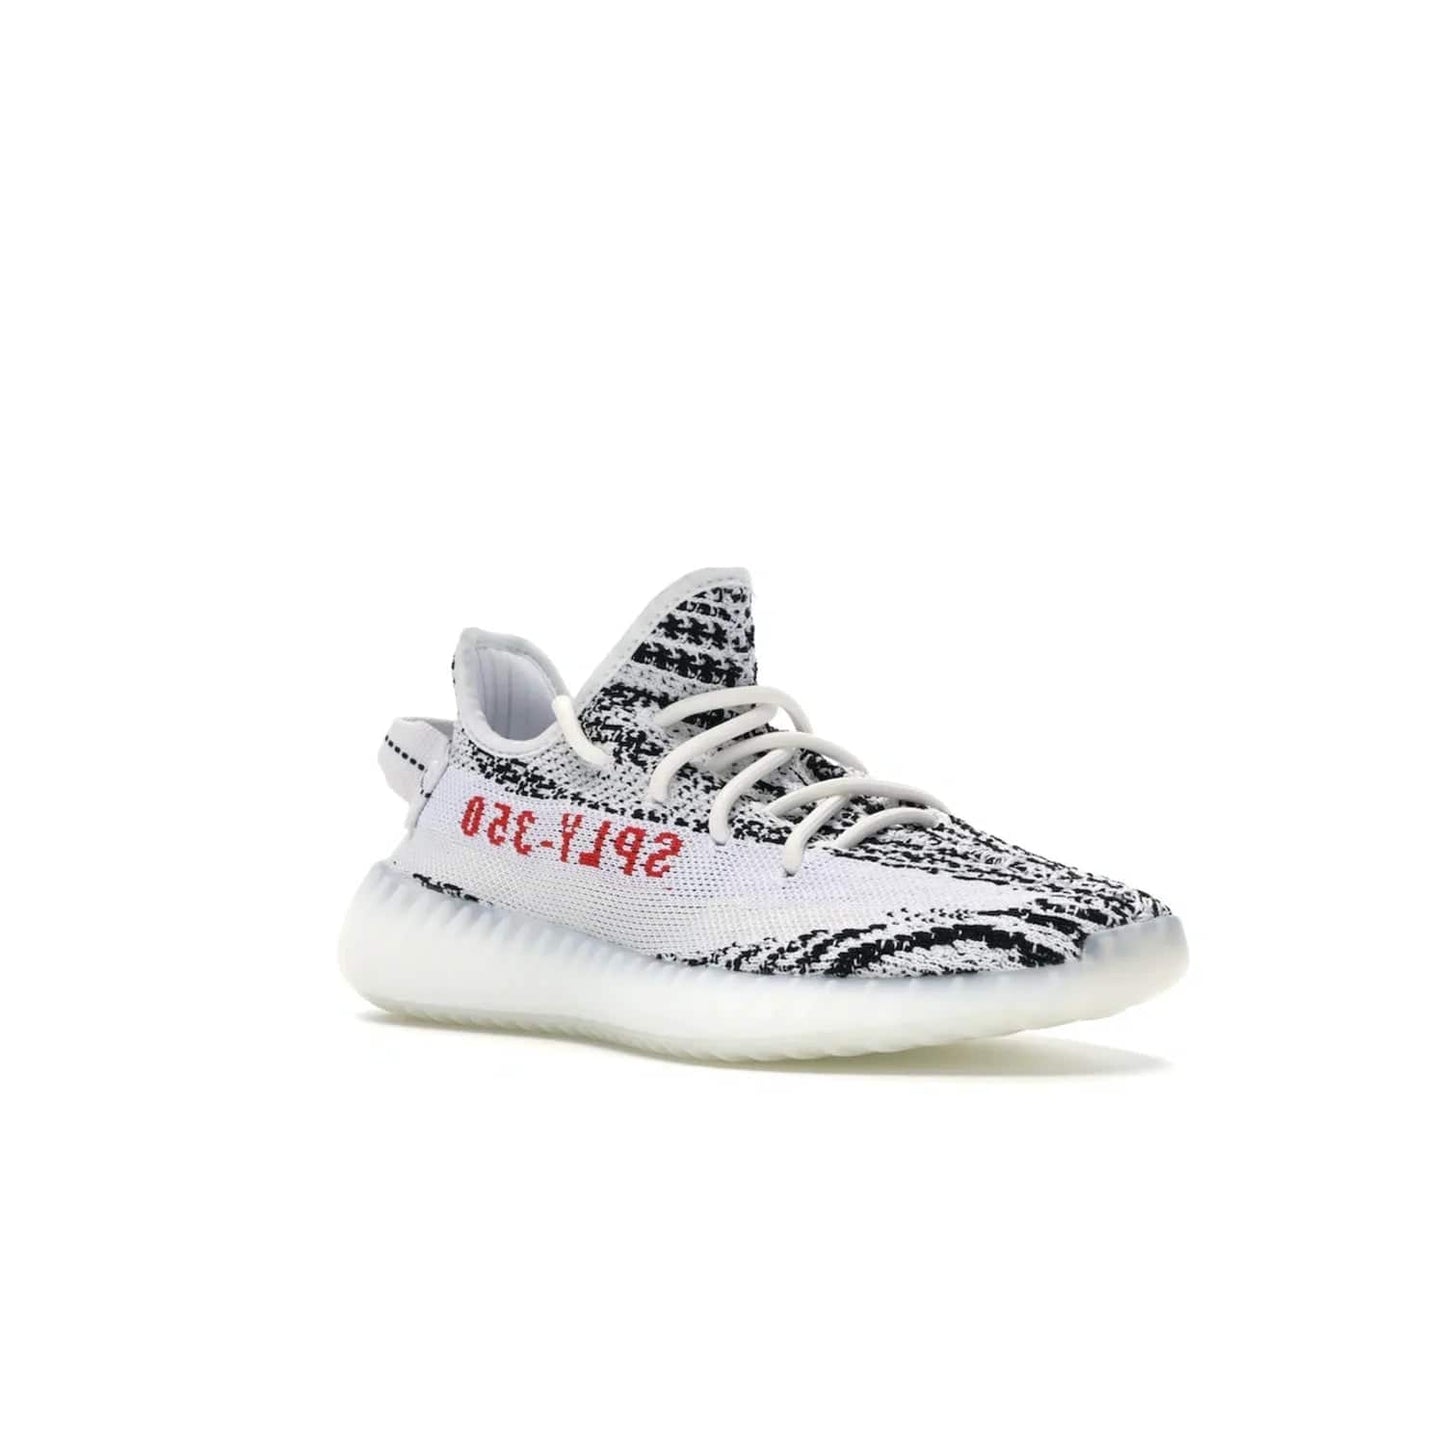 adidas Yeezy Boost 350 V2 Zebra - Image 5 - Only at www.BallersClubKickz.com - #
Score the iconic adidas Yeezy Boost 350 V2 Zebra for a fashionable addition to your street-style. Featuring a Primeknit upper and Boost sole, you'll look great and feel comfortable with every step.